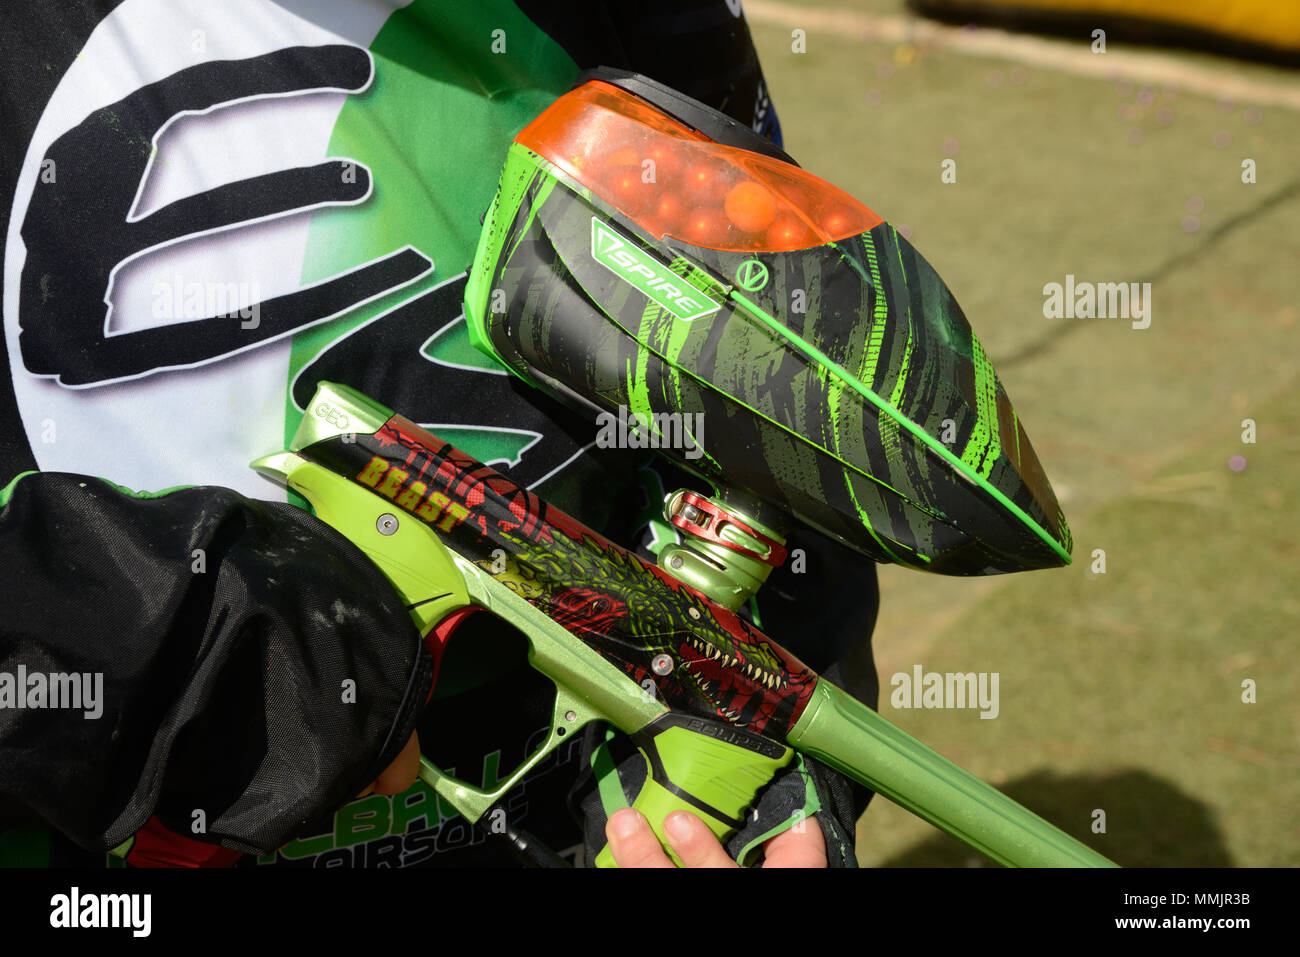 Paintball Gun, Paintball Equipment Stock Photo, Picture and